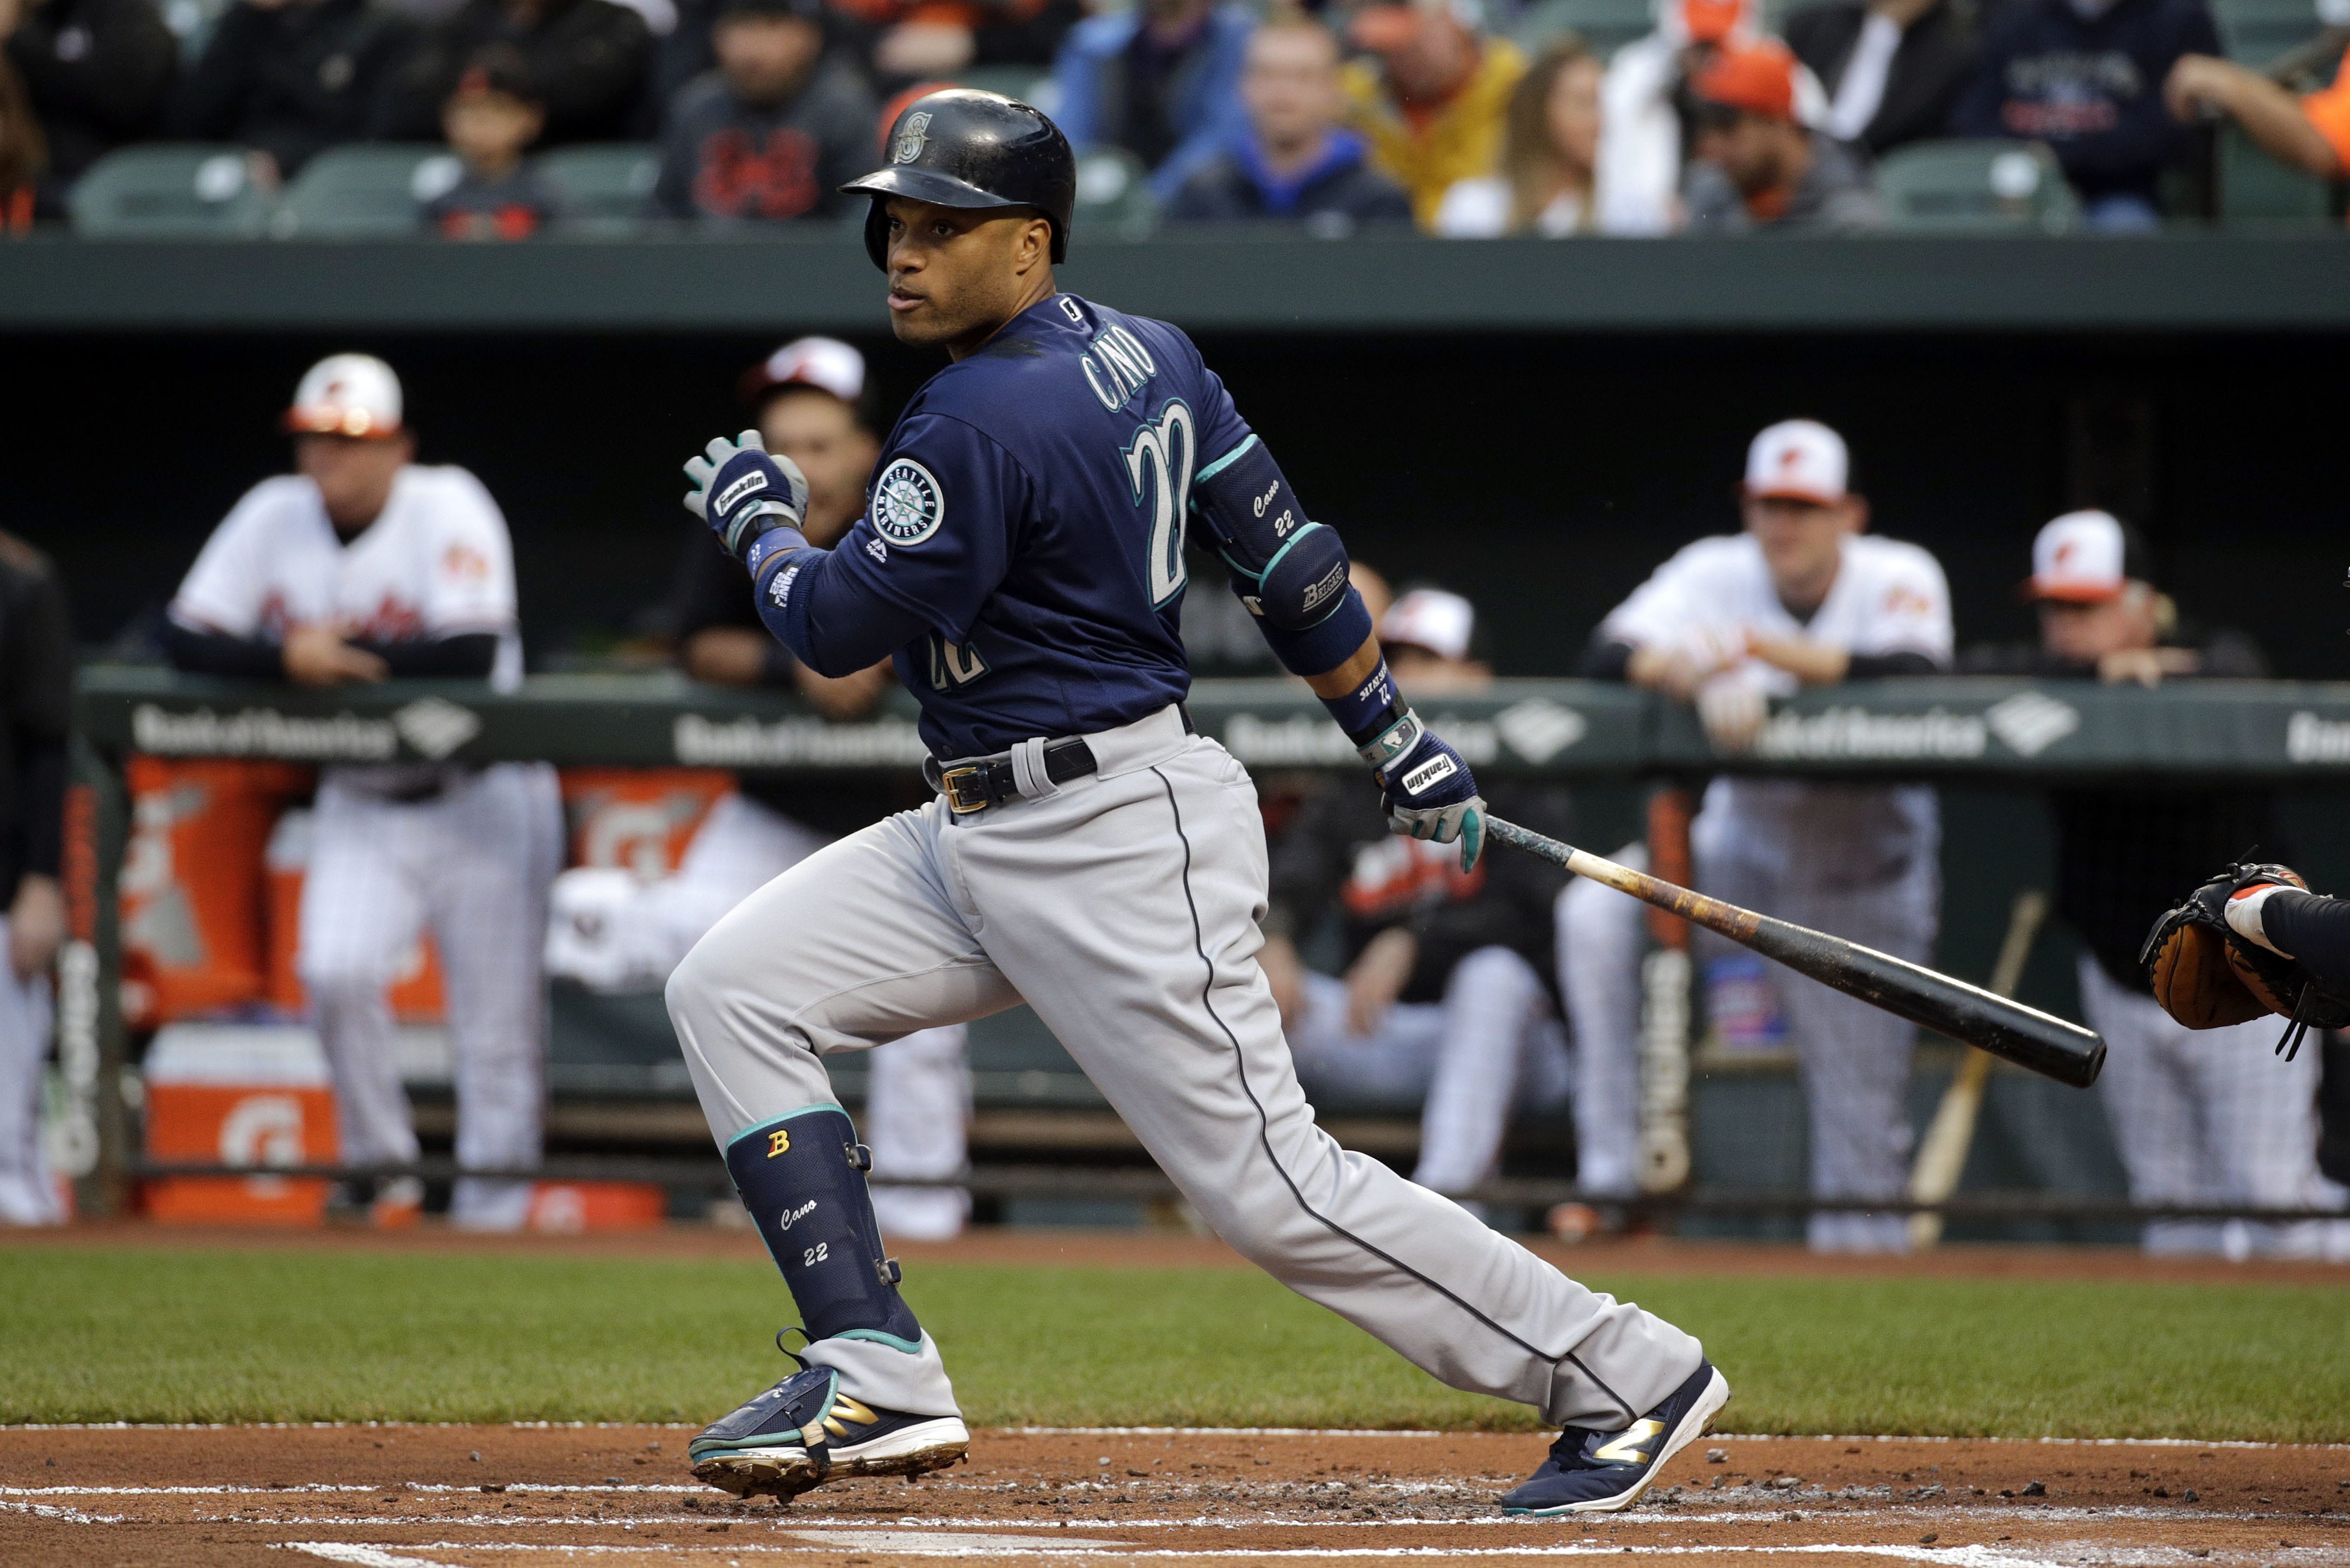 Seattle Mariners' Robinson Cano doubles in the first inning of a baseball game against the Baltimore Orioles in Baltimore, Tuesday, May 17, 2016.